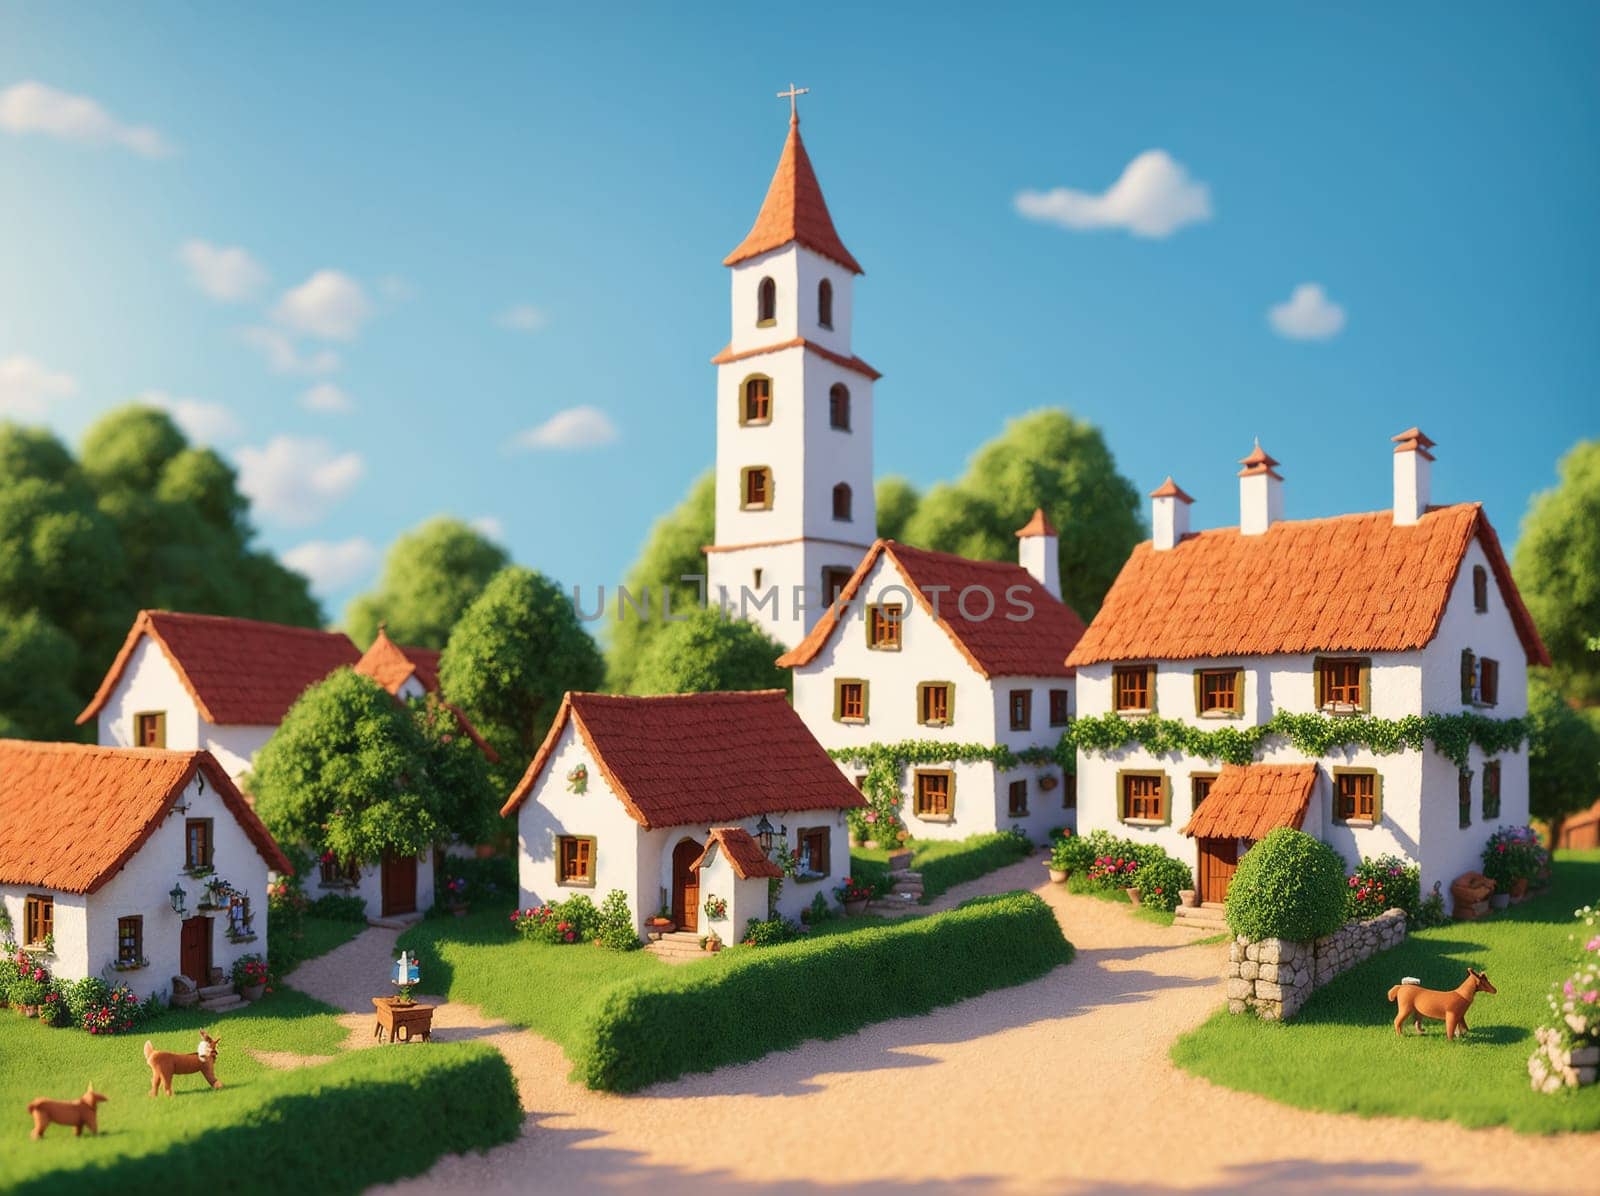 The image depicts a small village with several houses, a church, and a farm in the background.